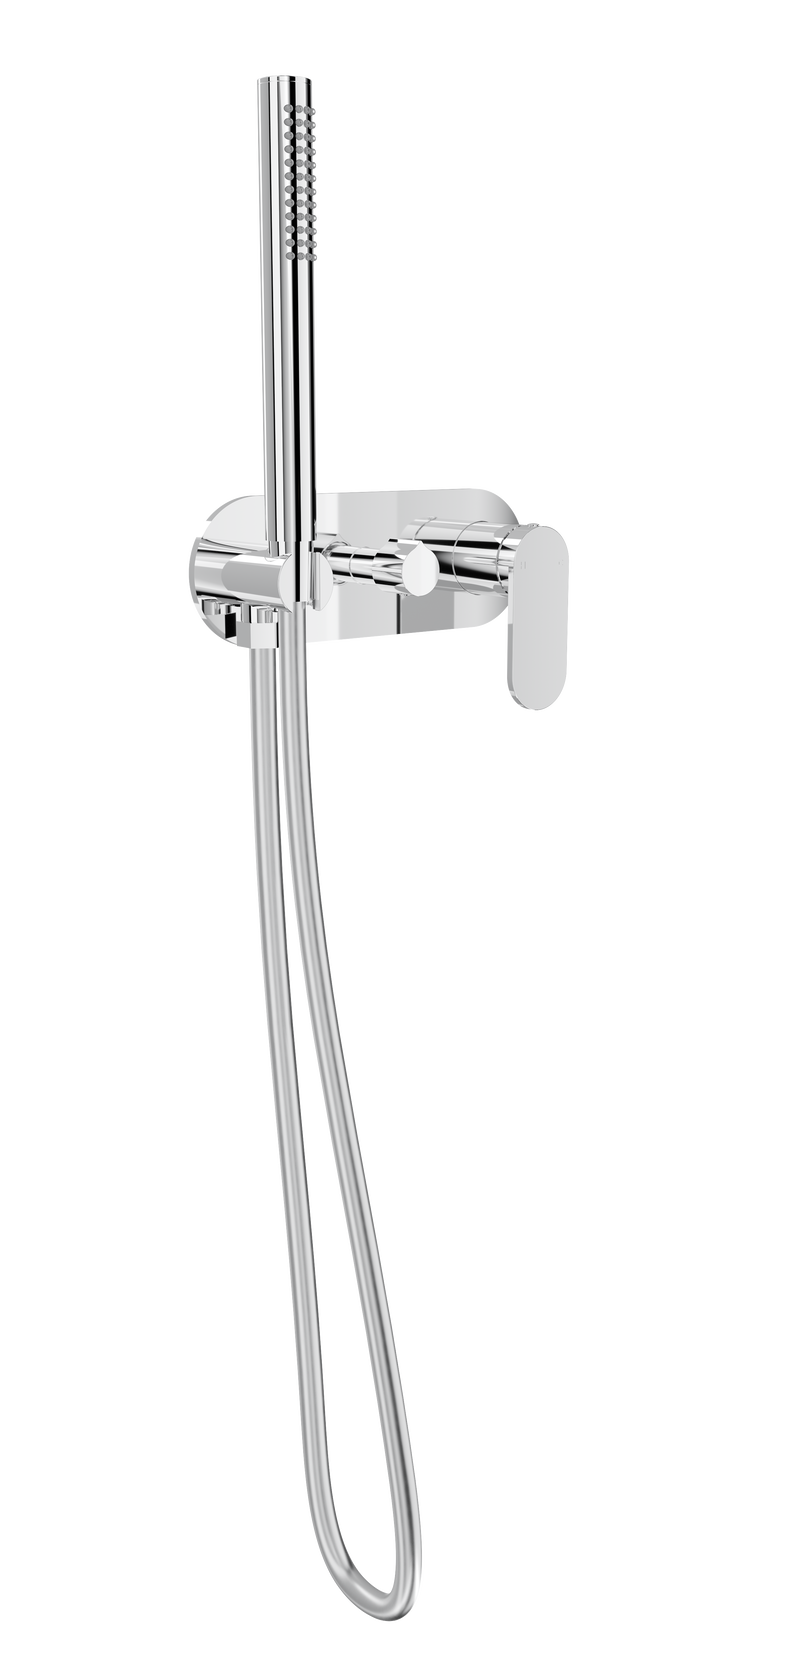 Linsol Capo 1-Plate Wall Mixer with Diverter & Hand Shower Chrome